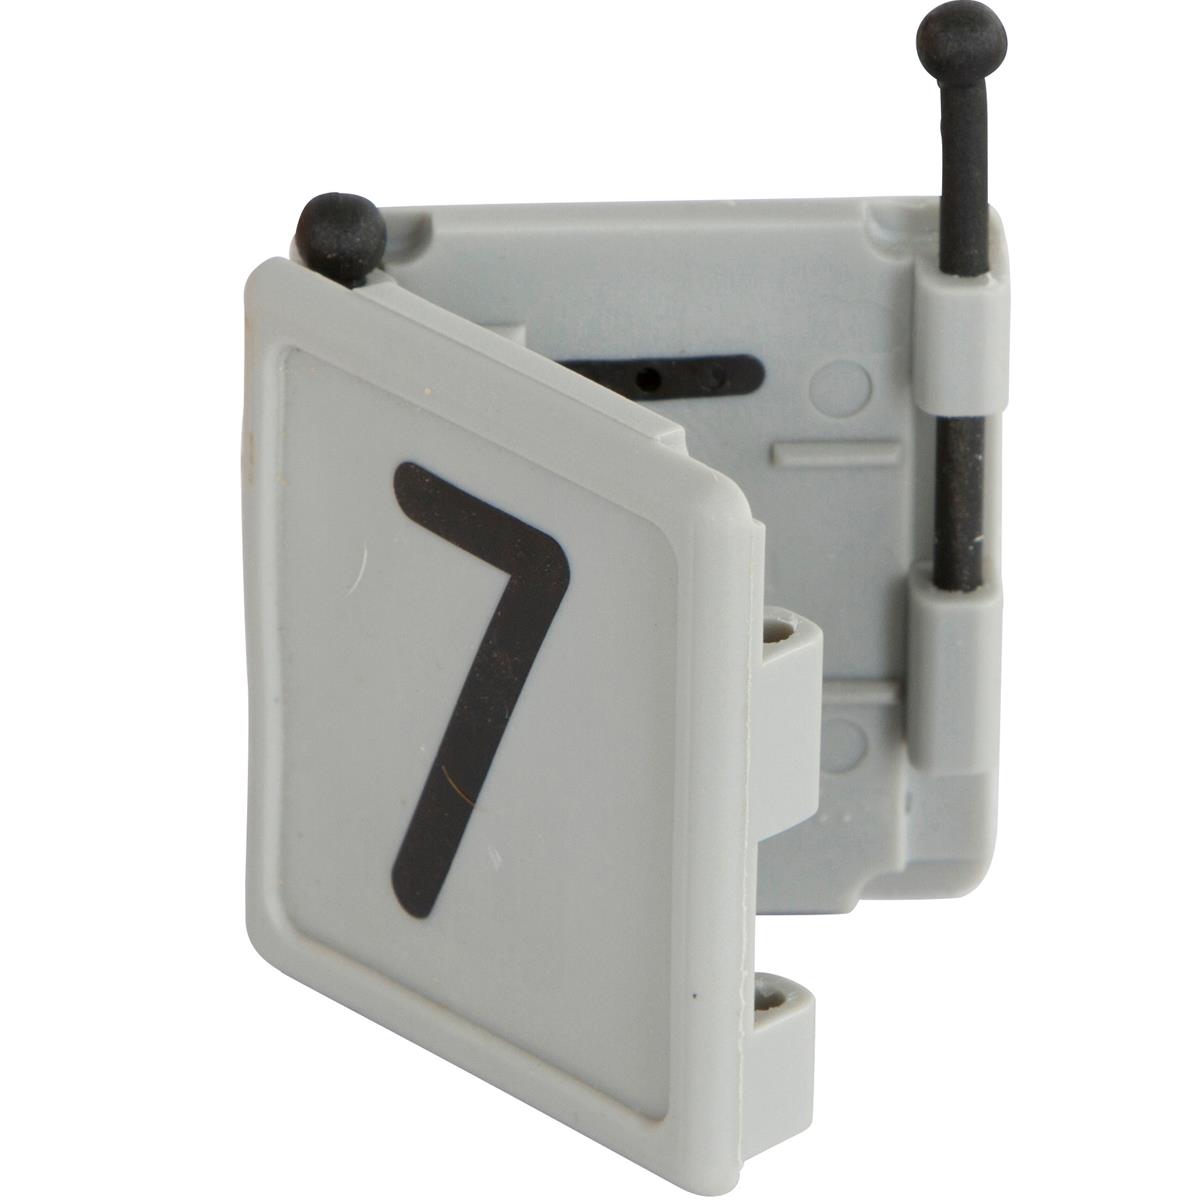 6x collar number one-digit DUO 7